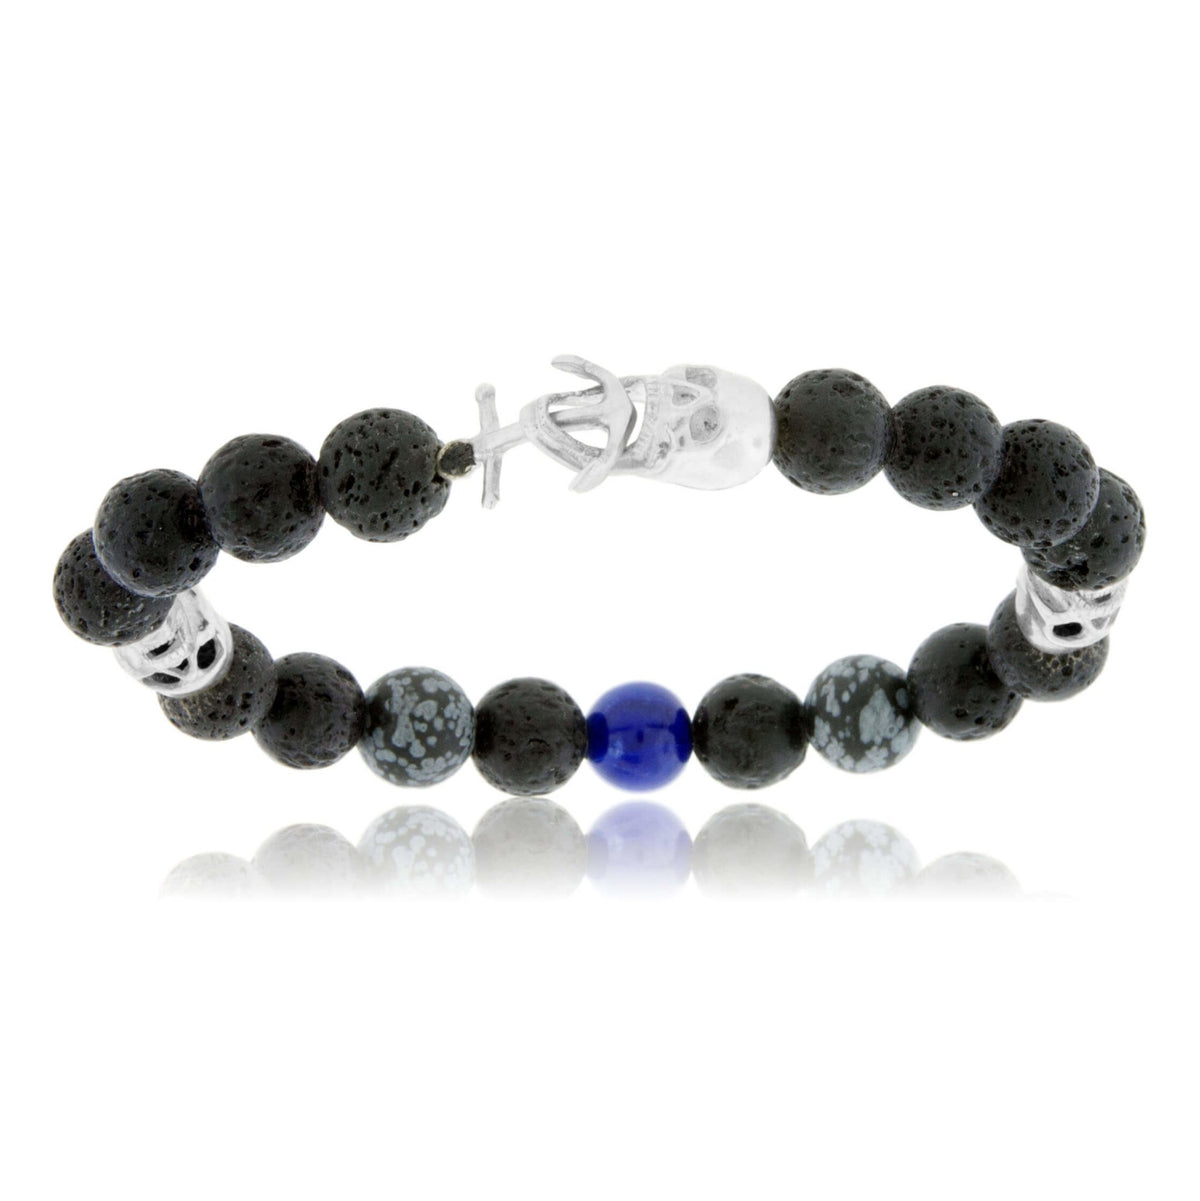 Lava Rock, Snowflake Obsidian, Lapis & Sterling Silver Skull Bracelet with Skull & Anchor Clasp - Park City Jewelers